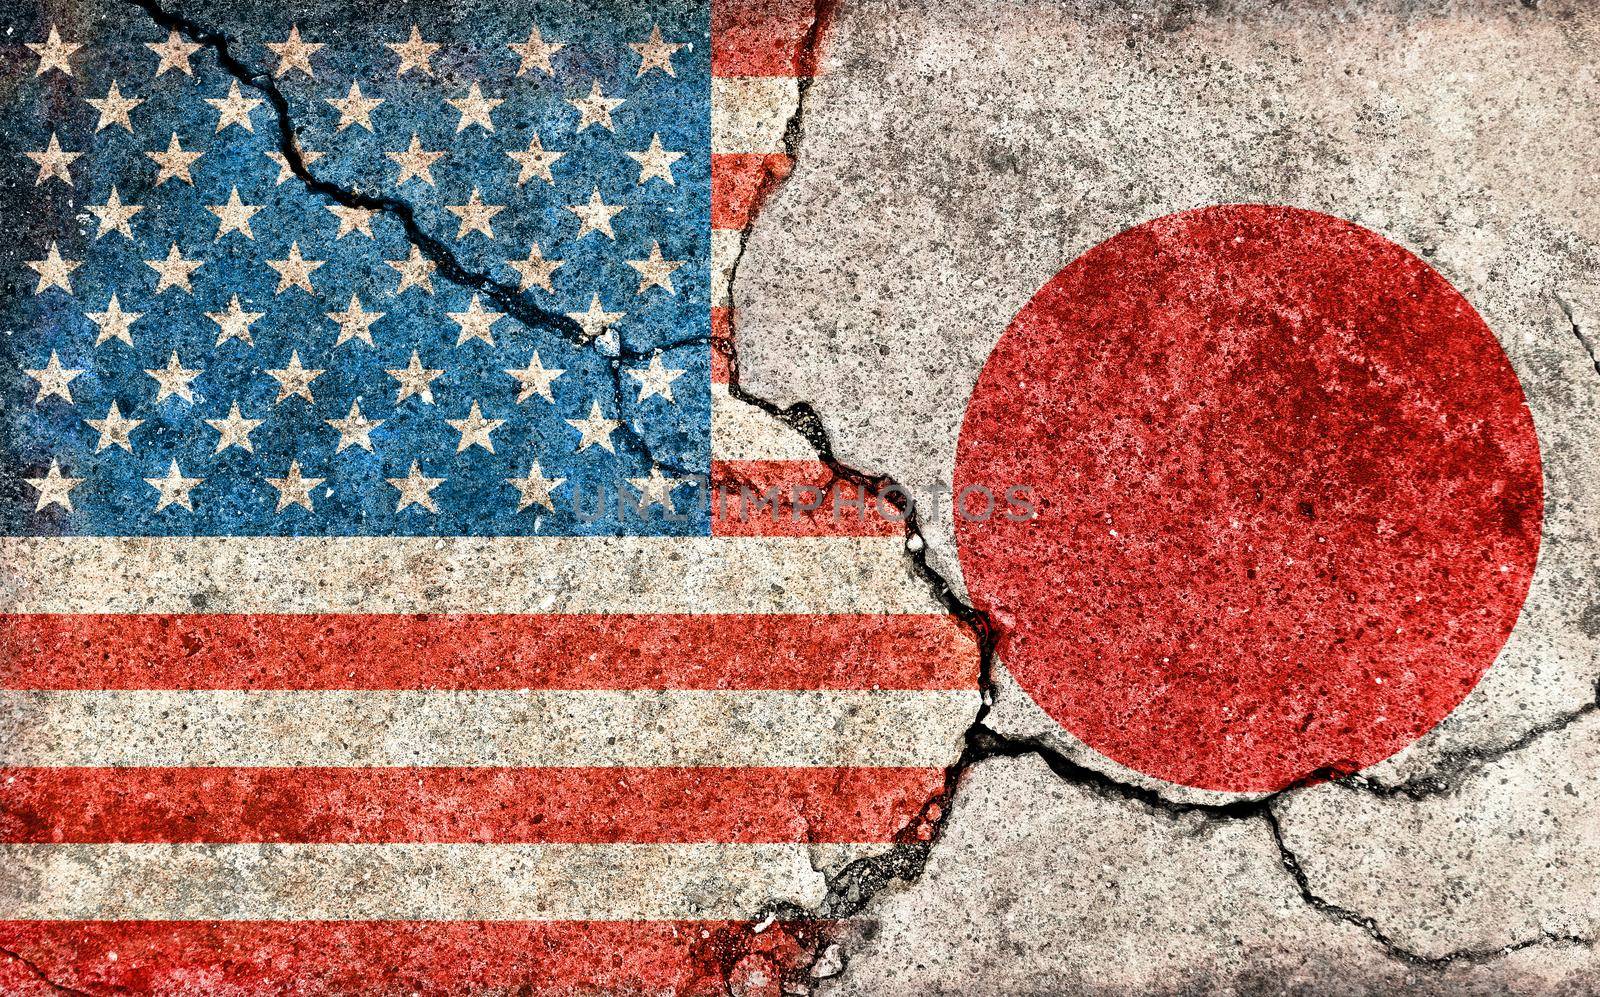 Grunge country flag illustration (cracked concrete background) / USA vs Japan (Political or economic conflict) by barks